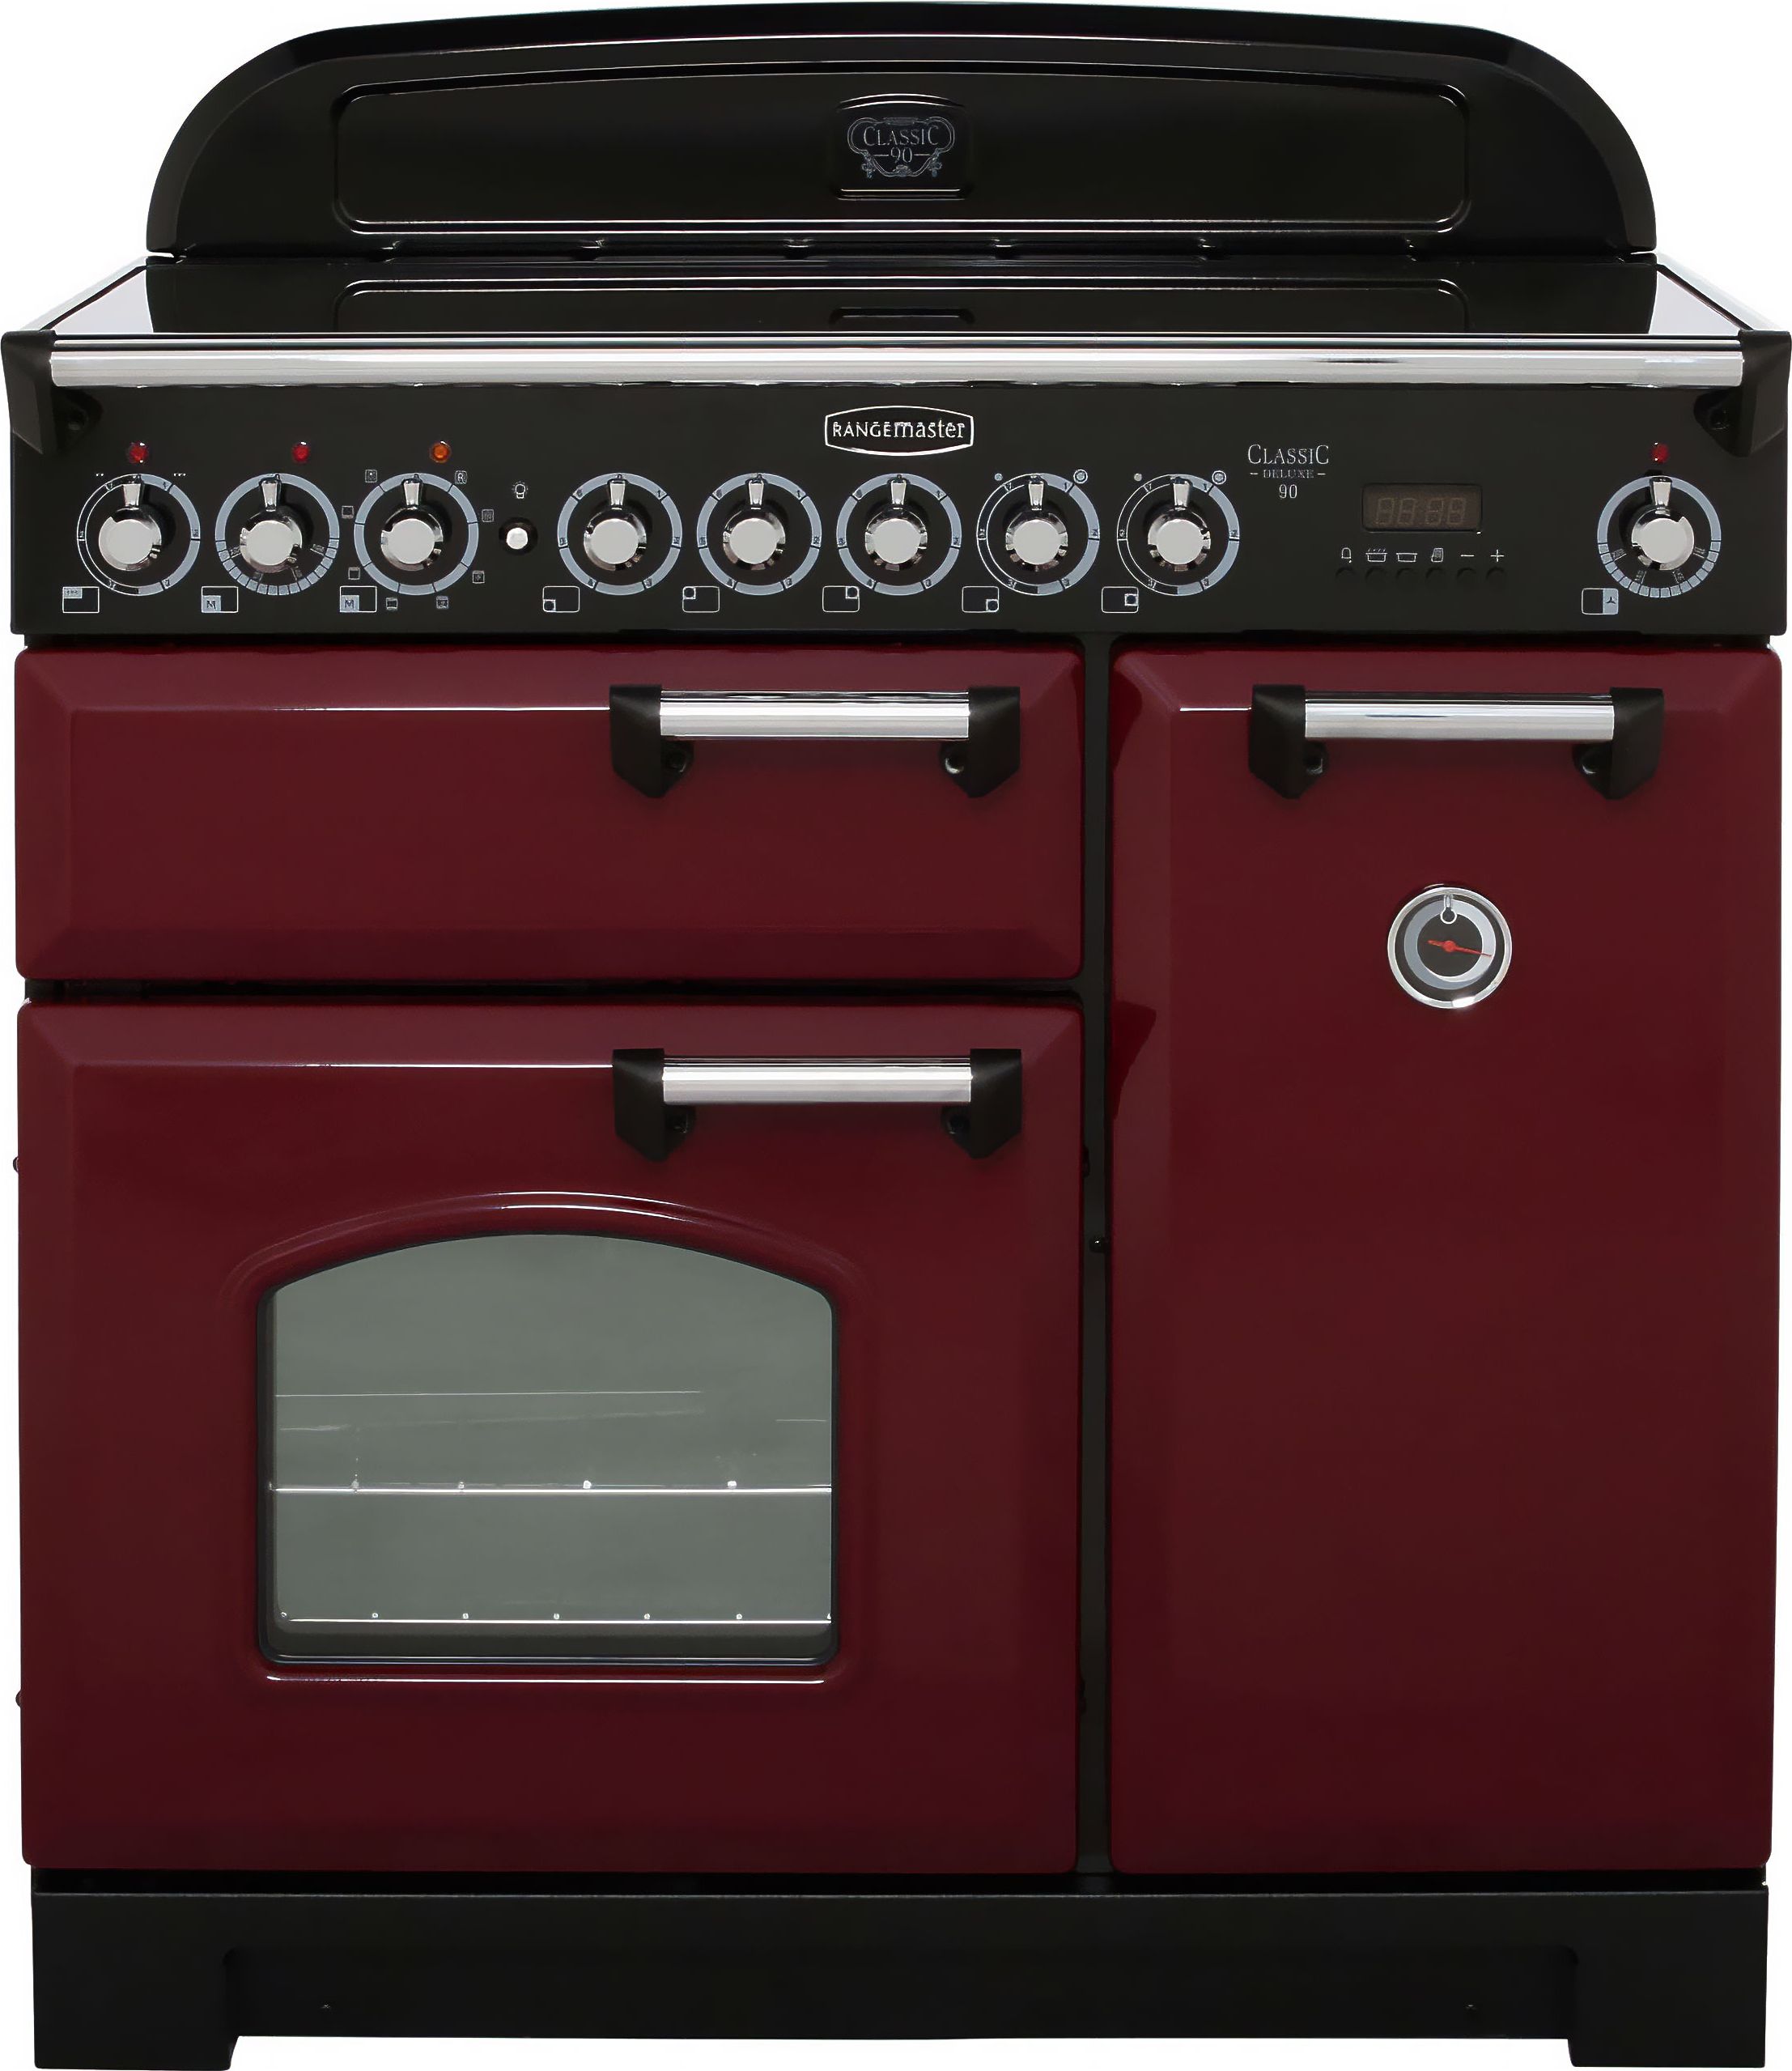 Rangemaster Classic Deluxe CDL90ECCY/B 90cm Electric Range Cooker with Ceramic Hob - Cranberry / Brass - A/A Rated, Red